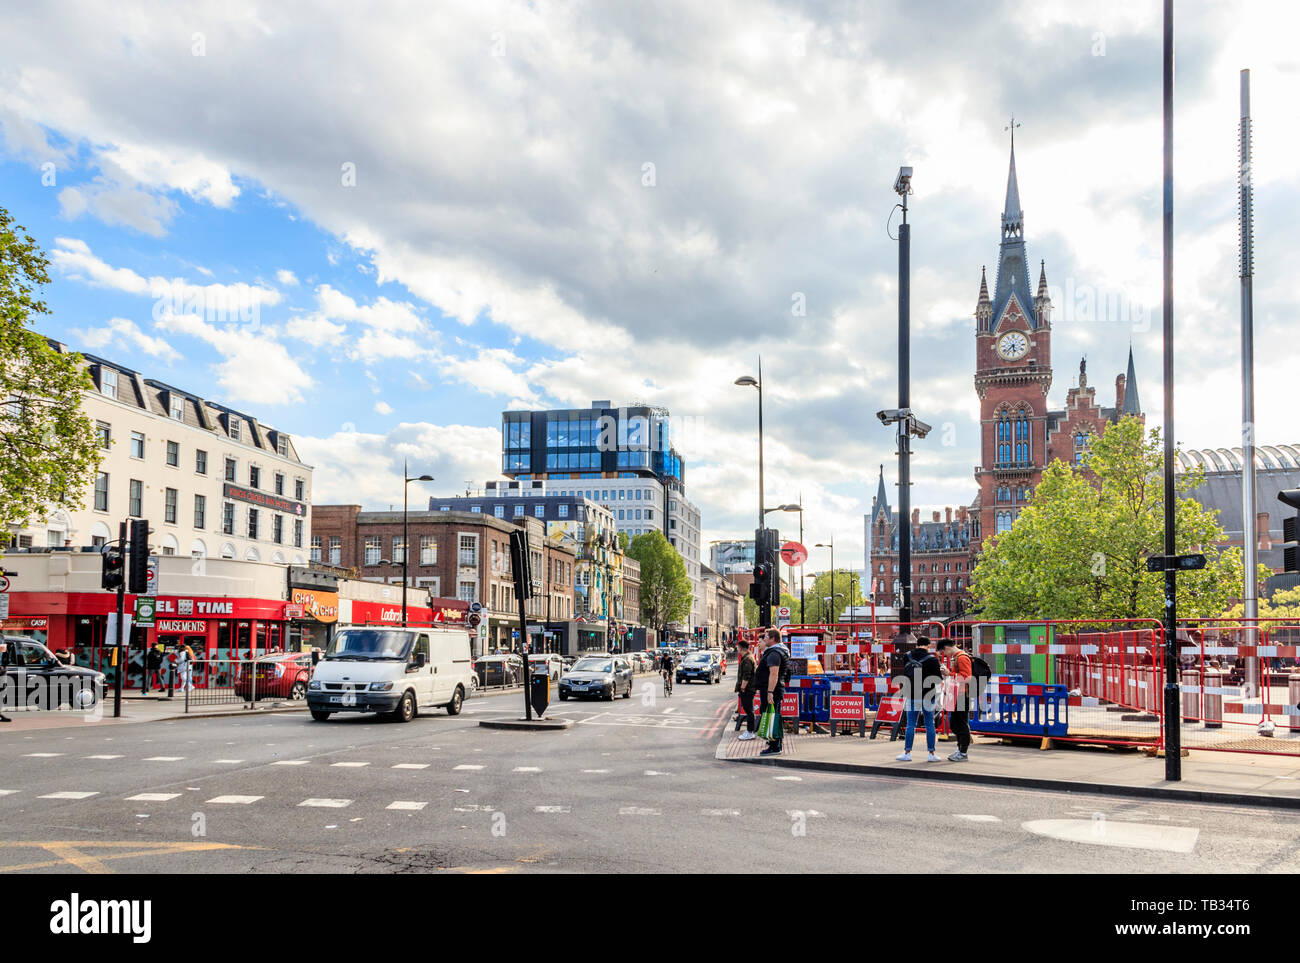 Euston Road at the junction with York Way, St. Pancras Station on the right, on a Sunday afternoon in spring, King's Cross, London, UK 2019 Stock Photo